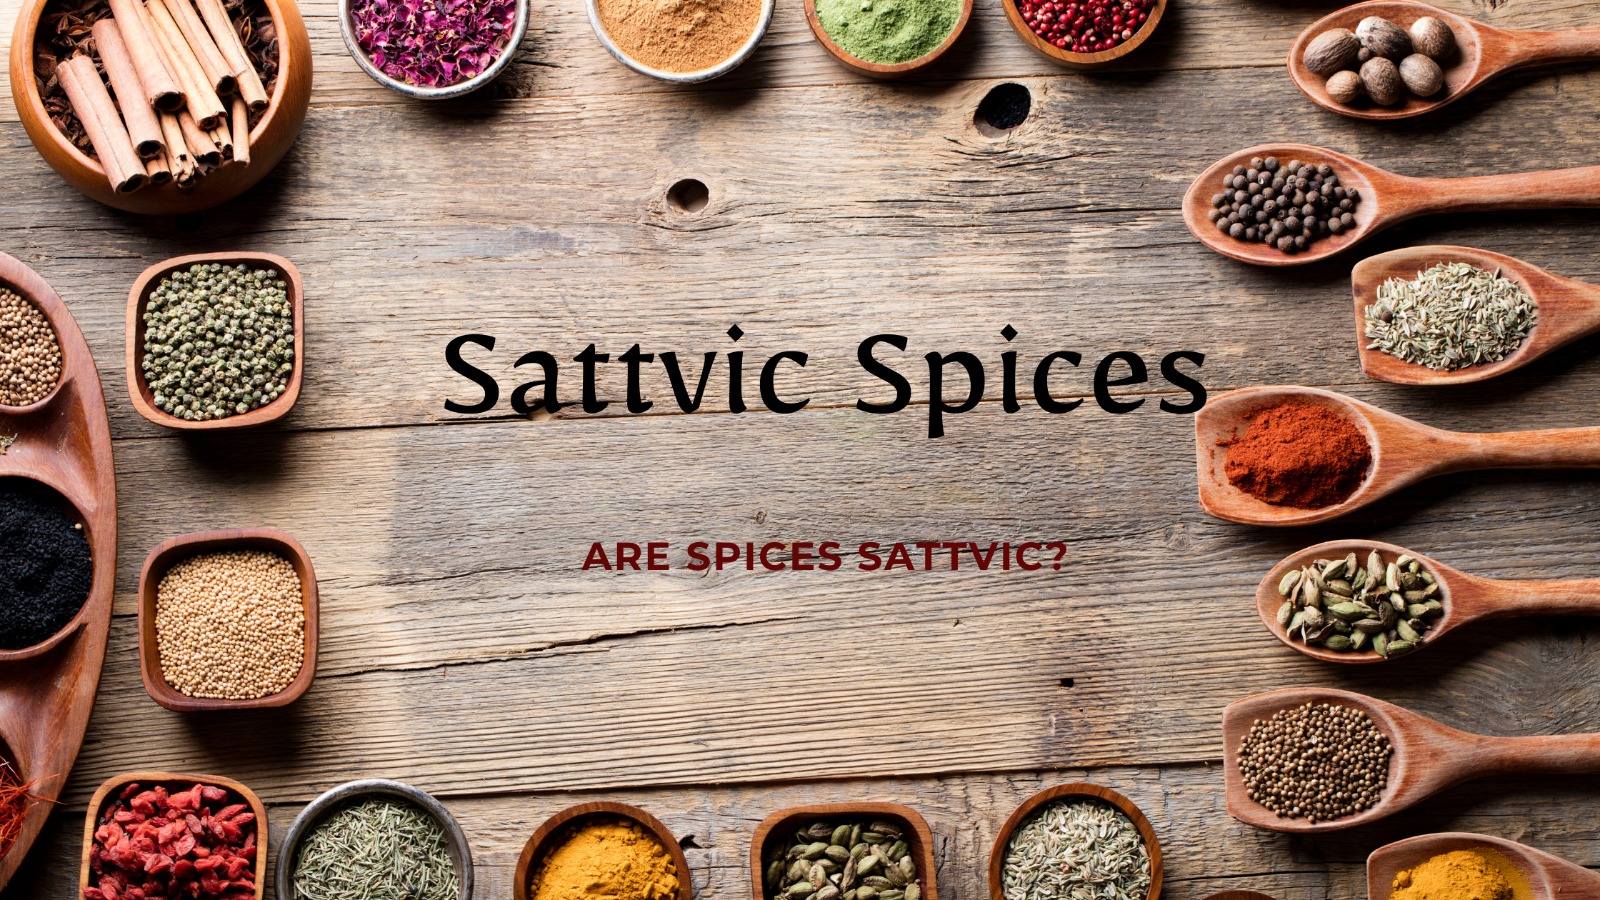 Are Spices Sattvic?